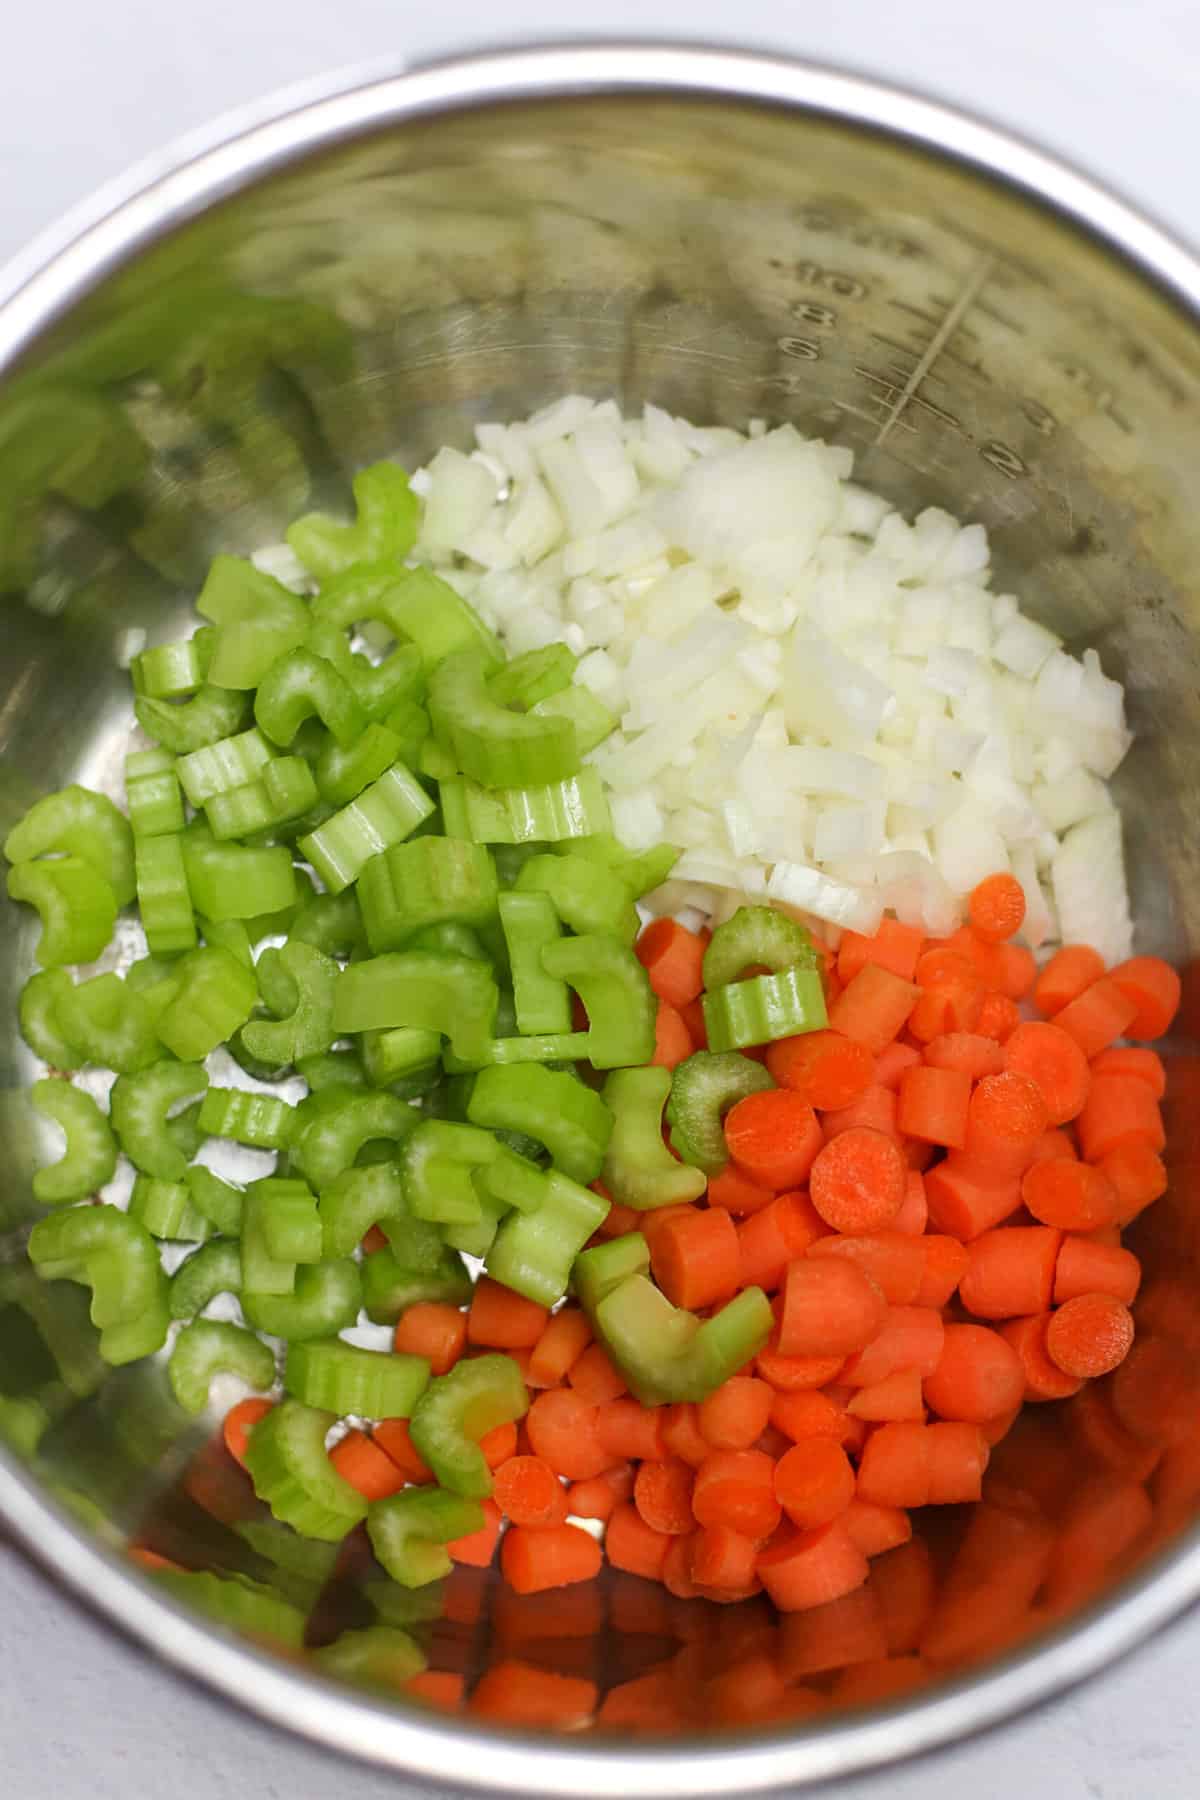 Chopped celery, onion, and carrot in an instant pot bowl.